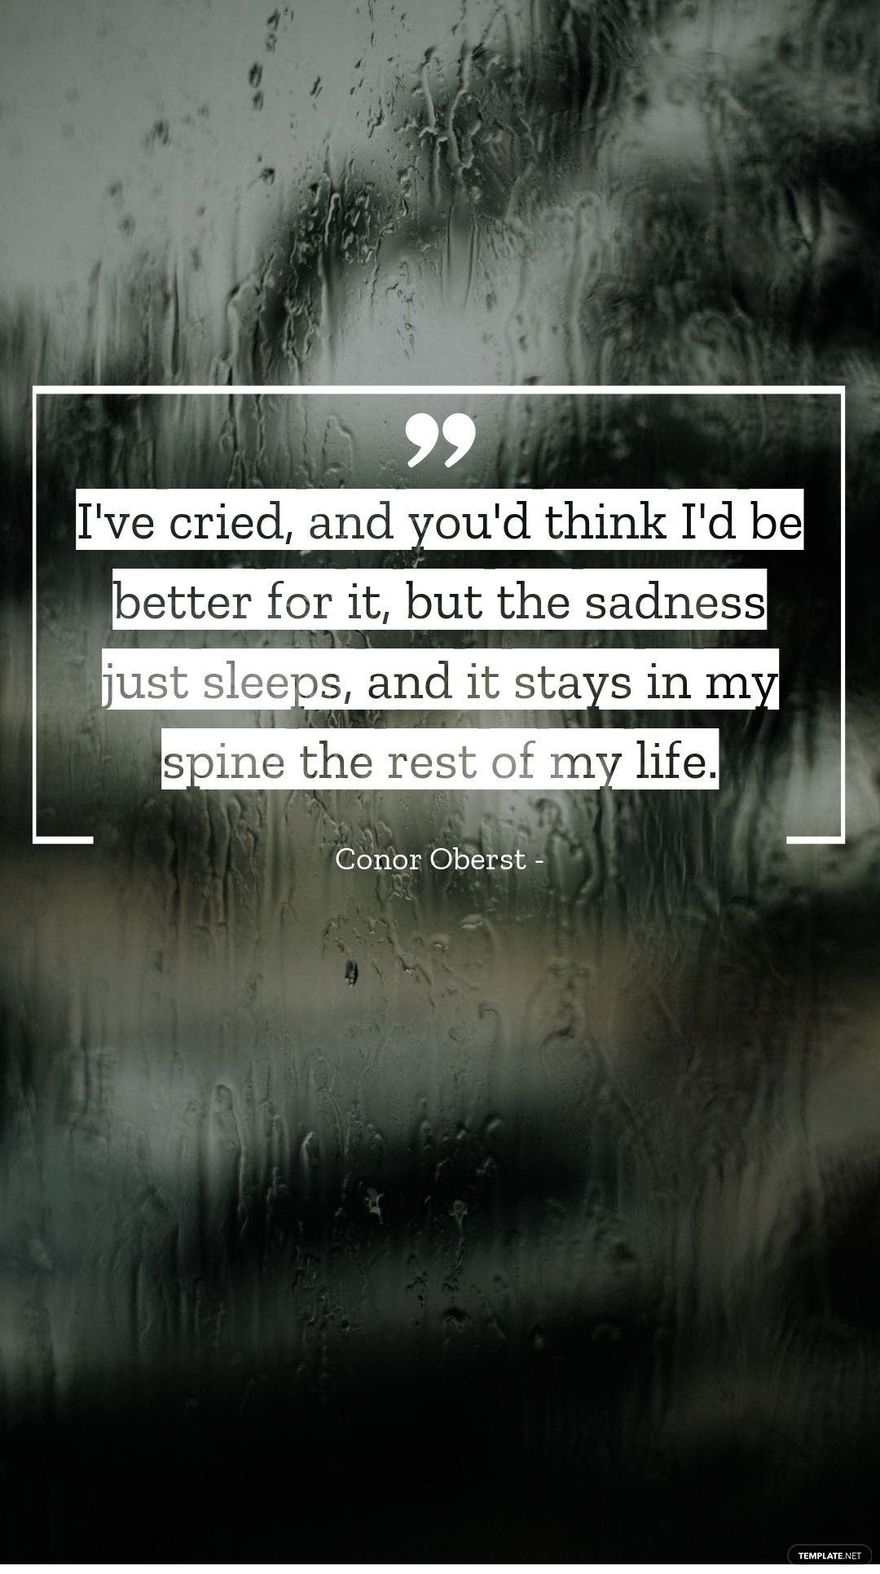 Conor Oberst - I've cried, and you'd think I'd be better for it, but the sadness just sleeps, and it stays in my spine the rest of my life.